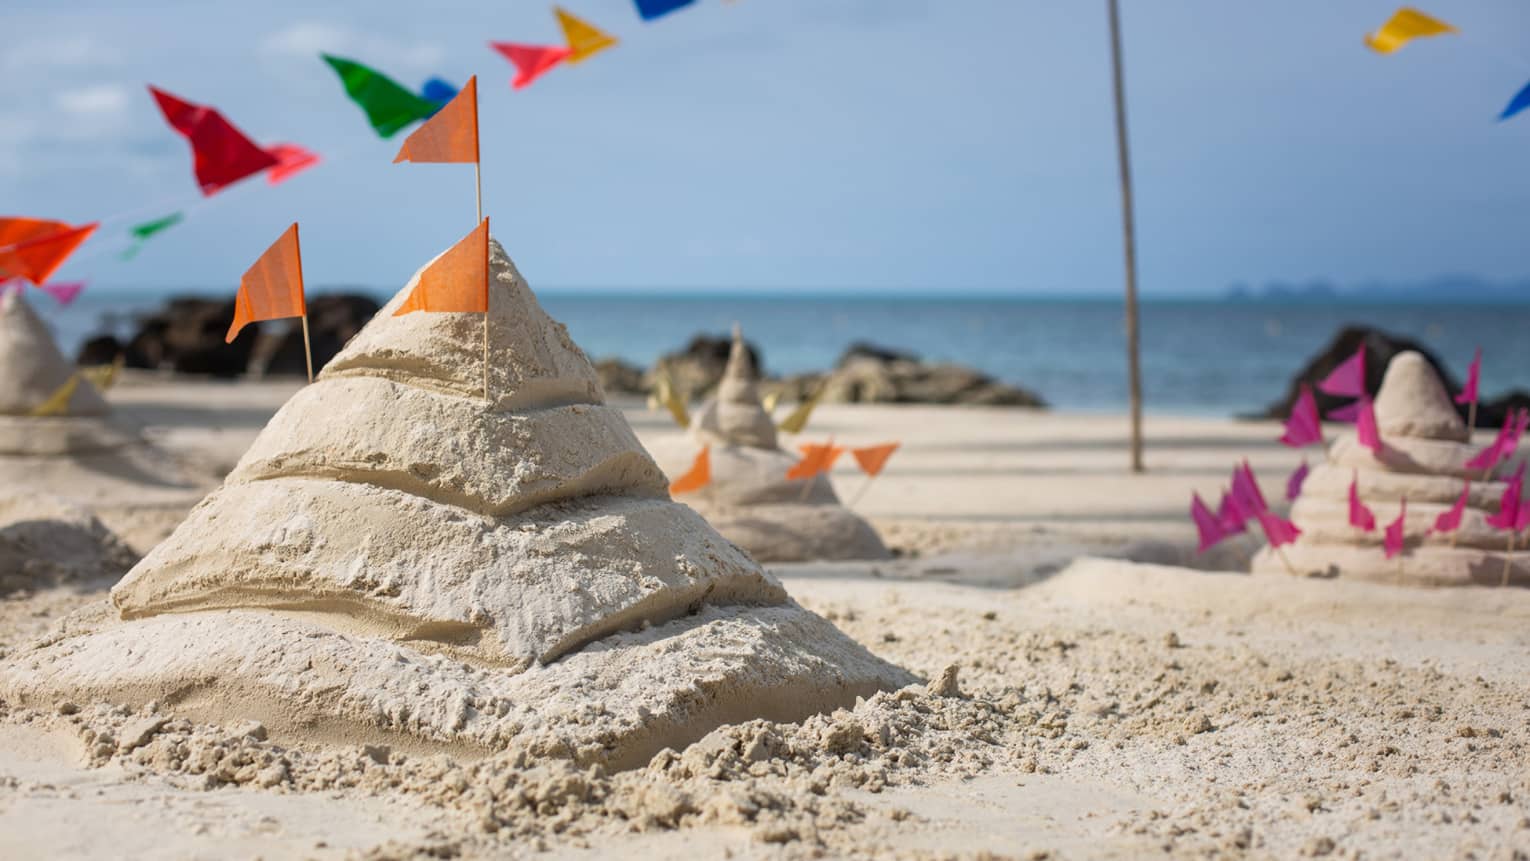 Sand castles adorned with various coloured flags